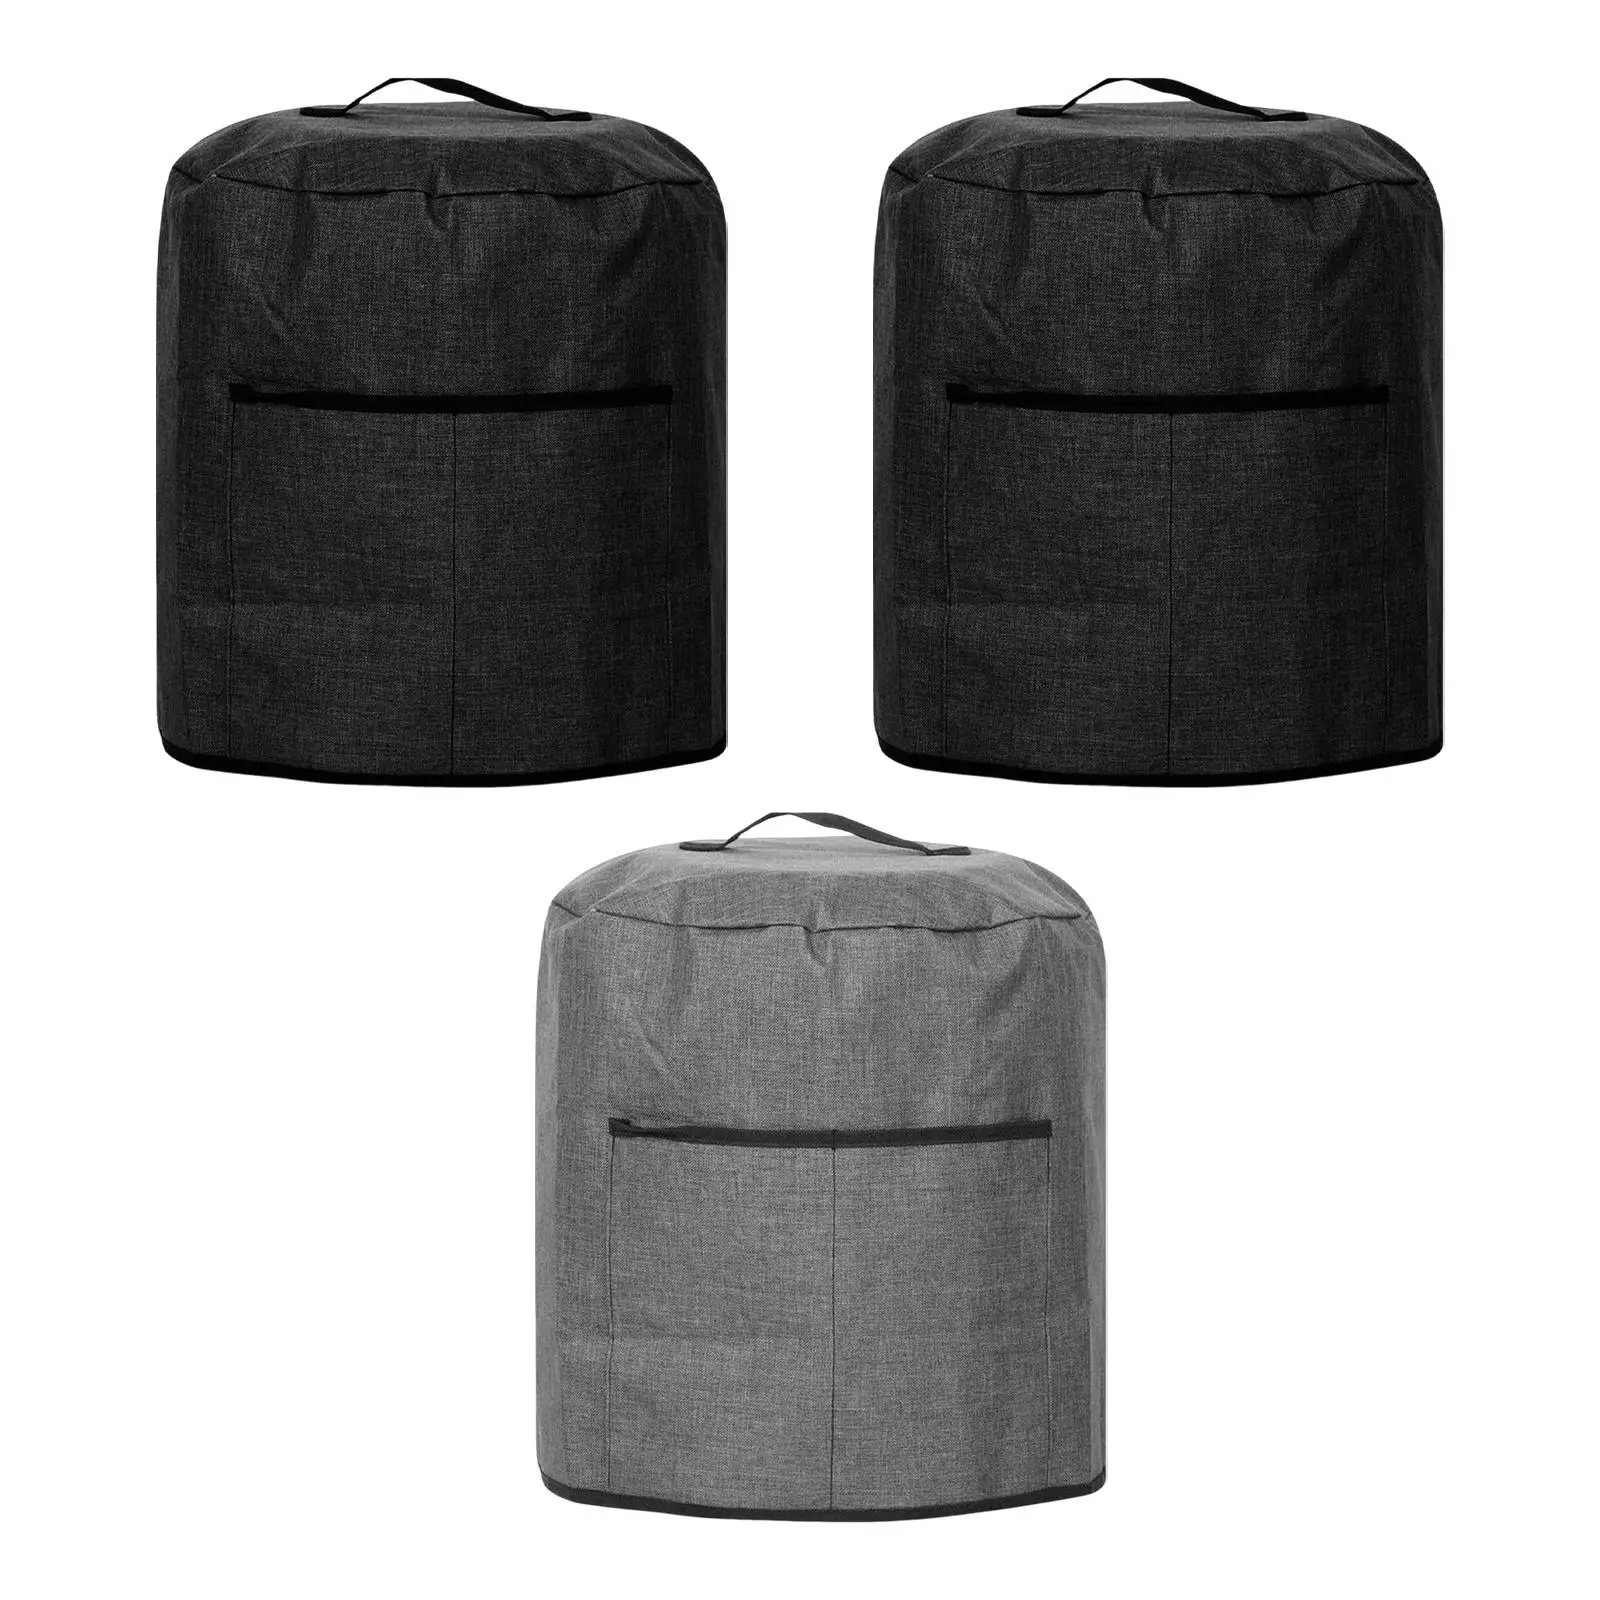 Air Fryer Dust Cover Lightweight Thick Camping Dustproof Reusable Multifunction Storage Cover for Cooker Air Fryer Oven Pot